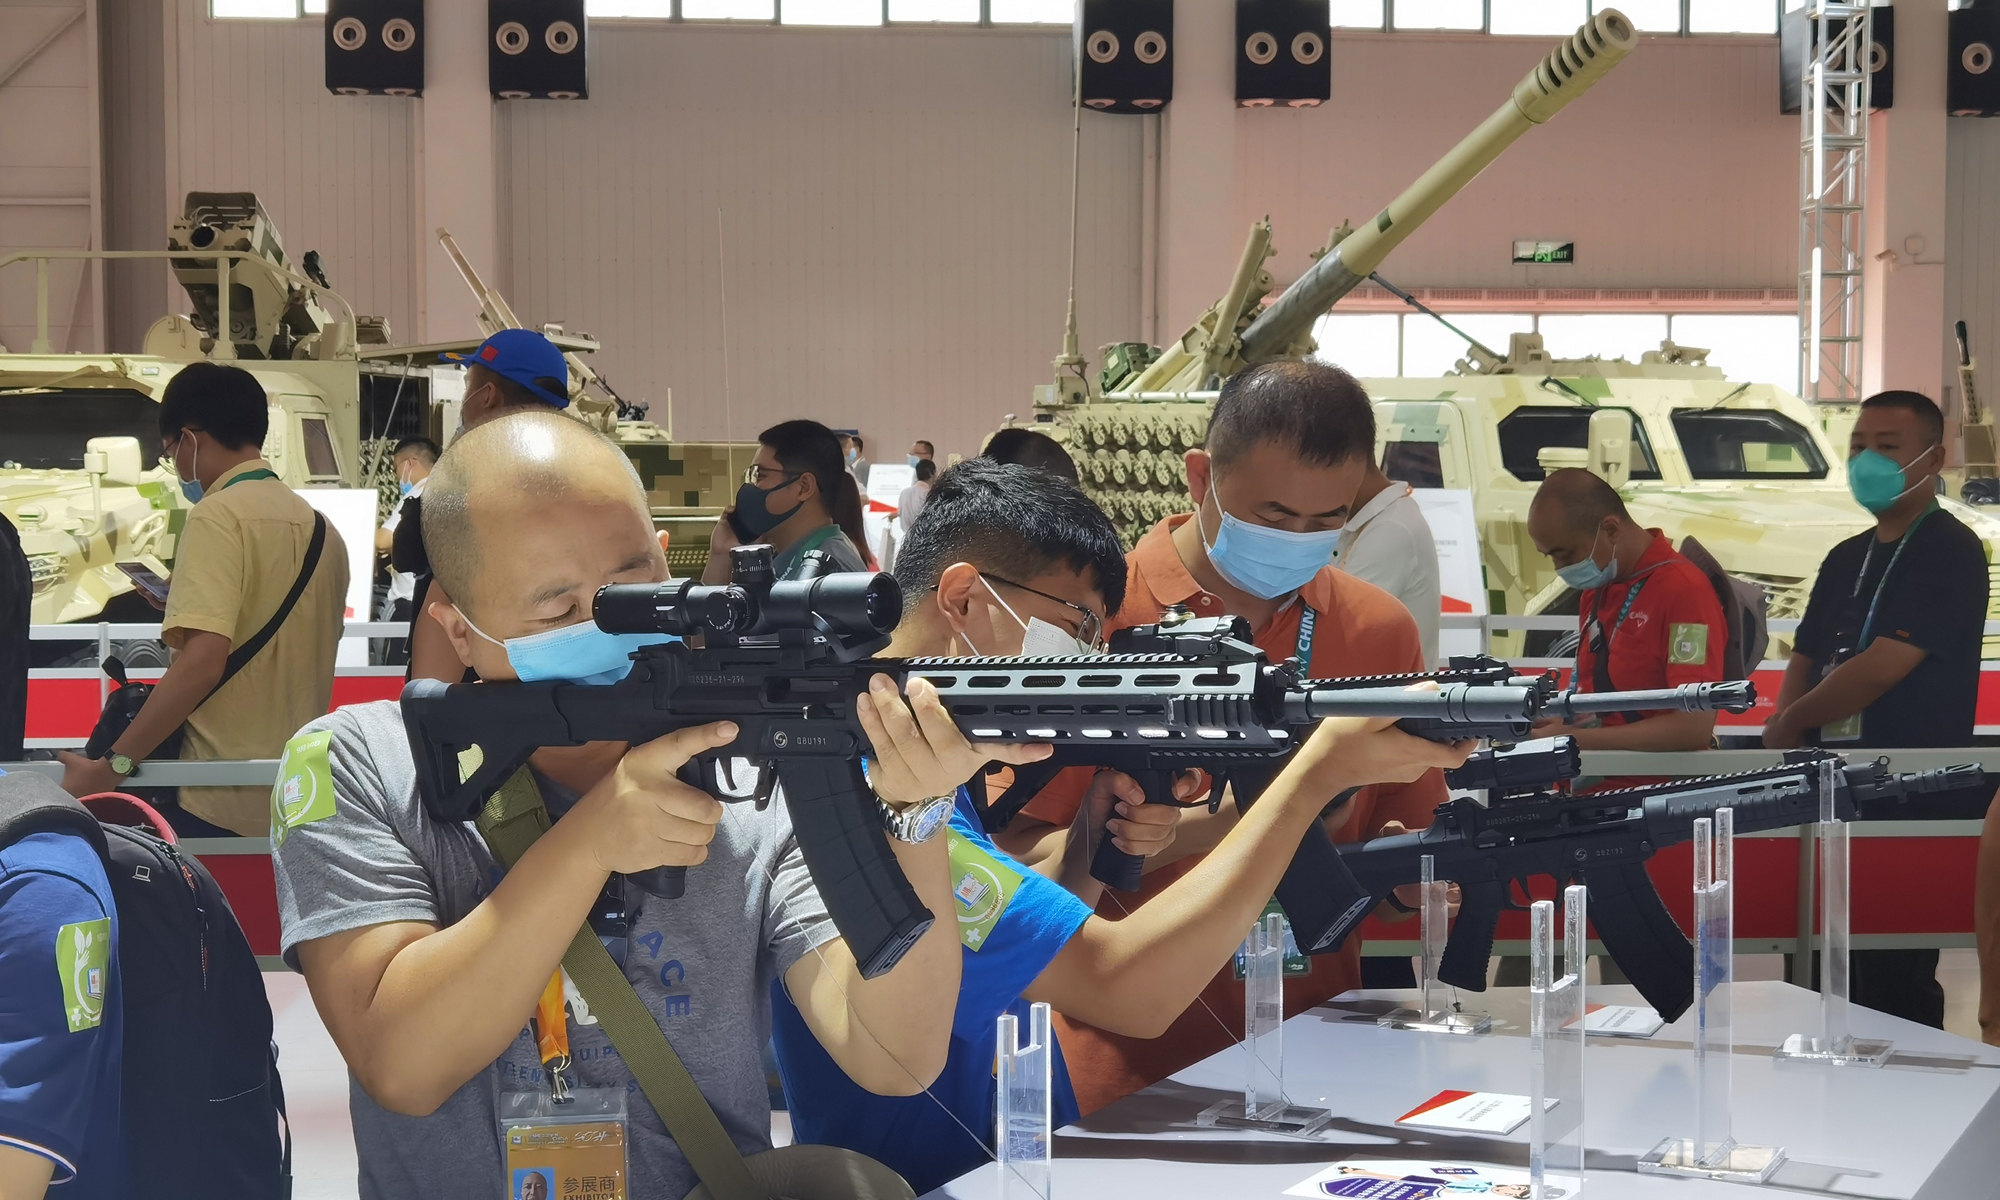 Visitors try China’s new QBZ-191 series rifles at the exhibition hall of the China North Industries Group Corporation Limited on Thursday. The weapons made their debut at the 13th Airshow China in Zhuhai, South China’s Guangdong Province. Photo: Yang Sheng/GT